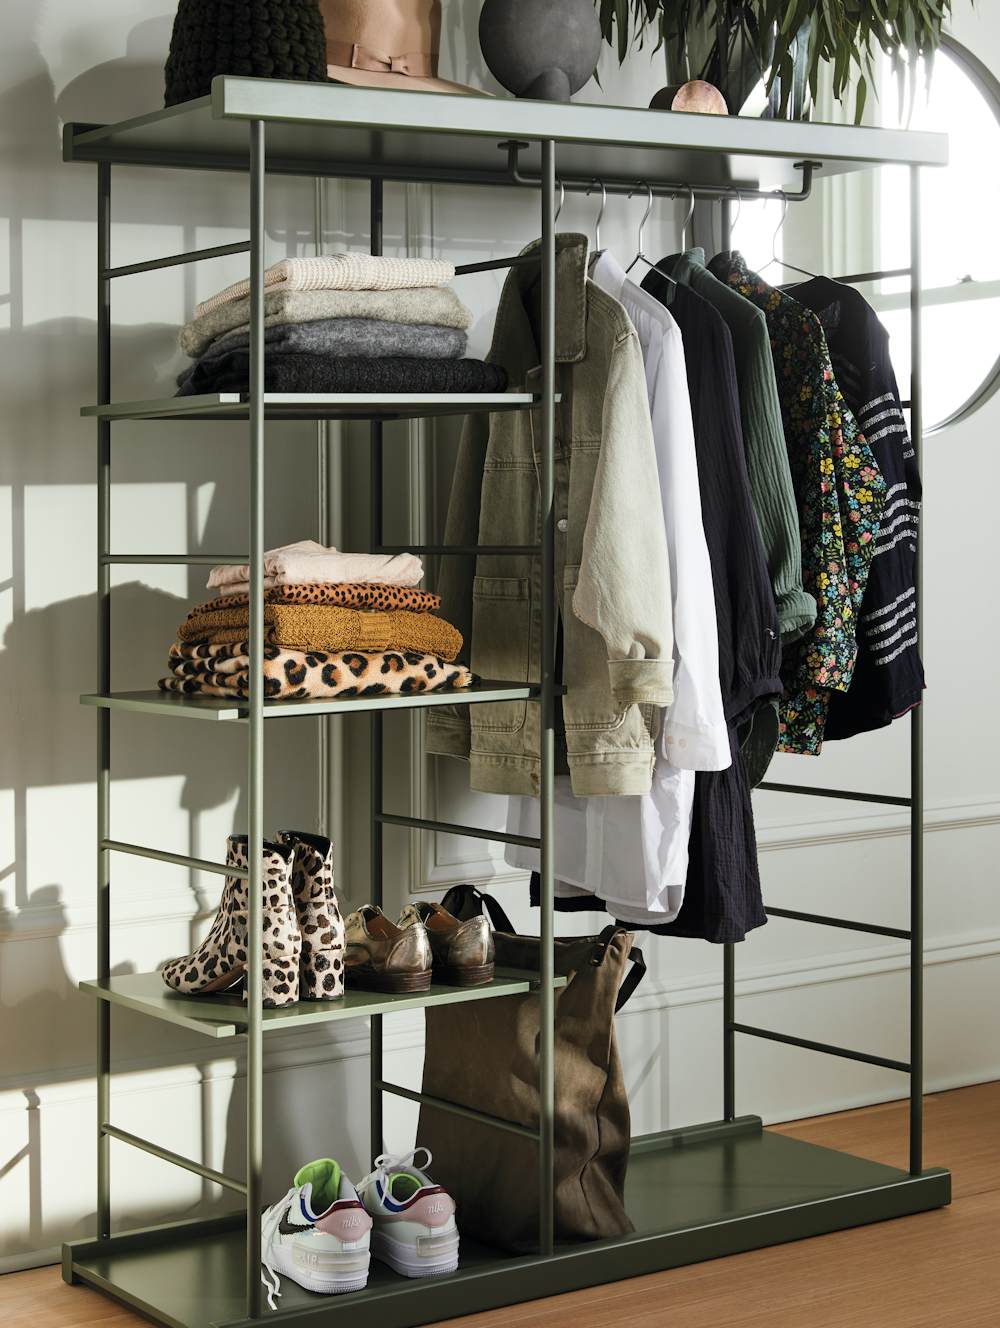 Bost Wardrobe in a home setting